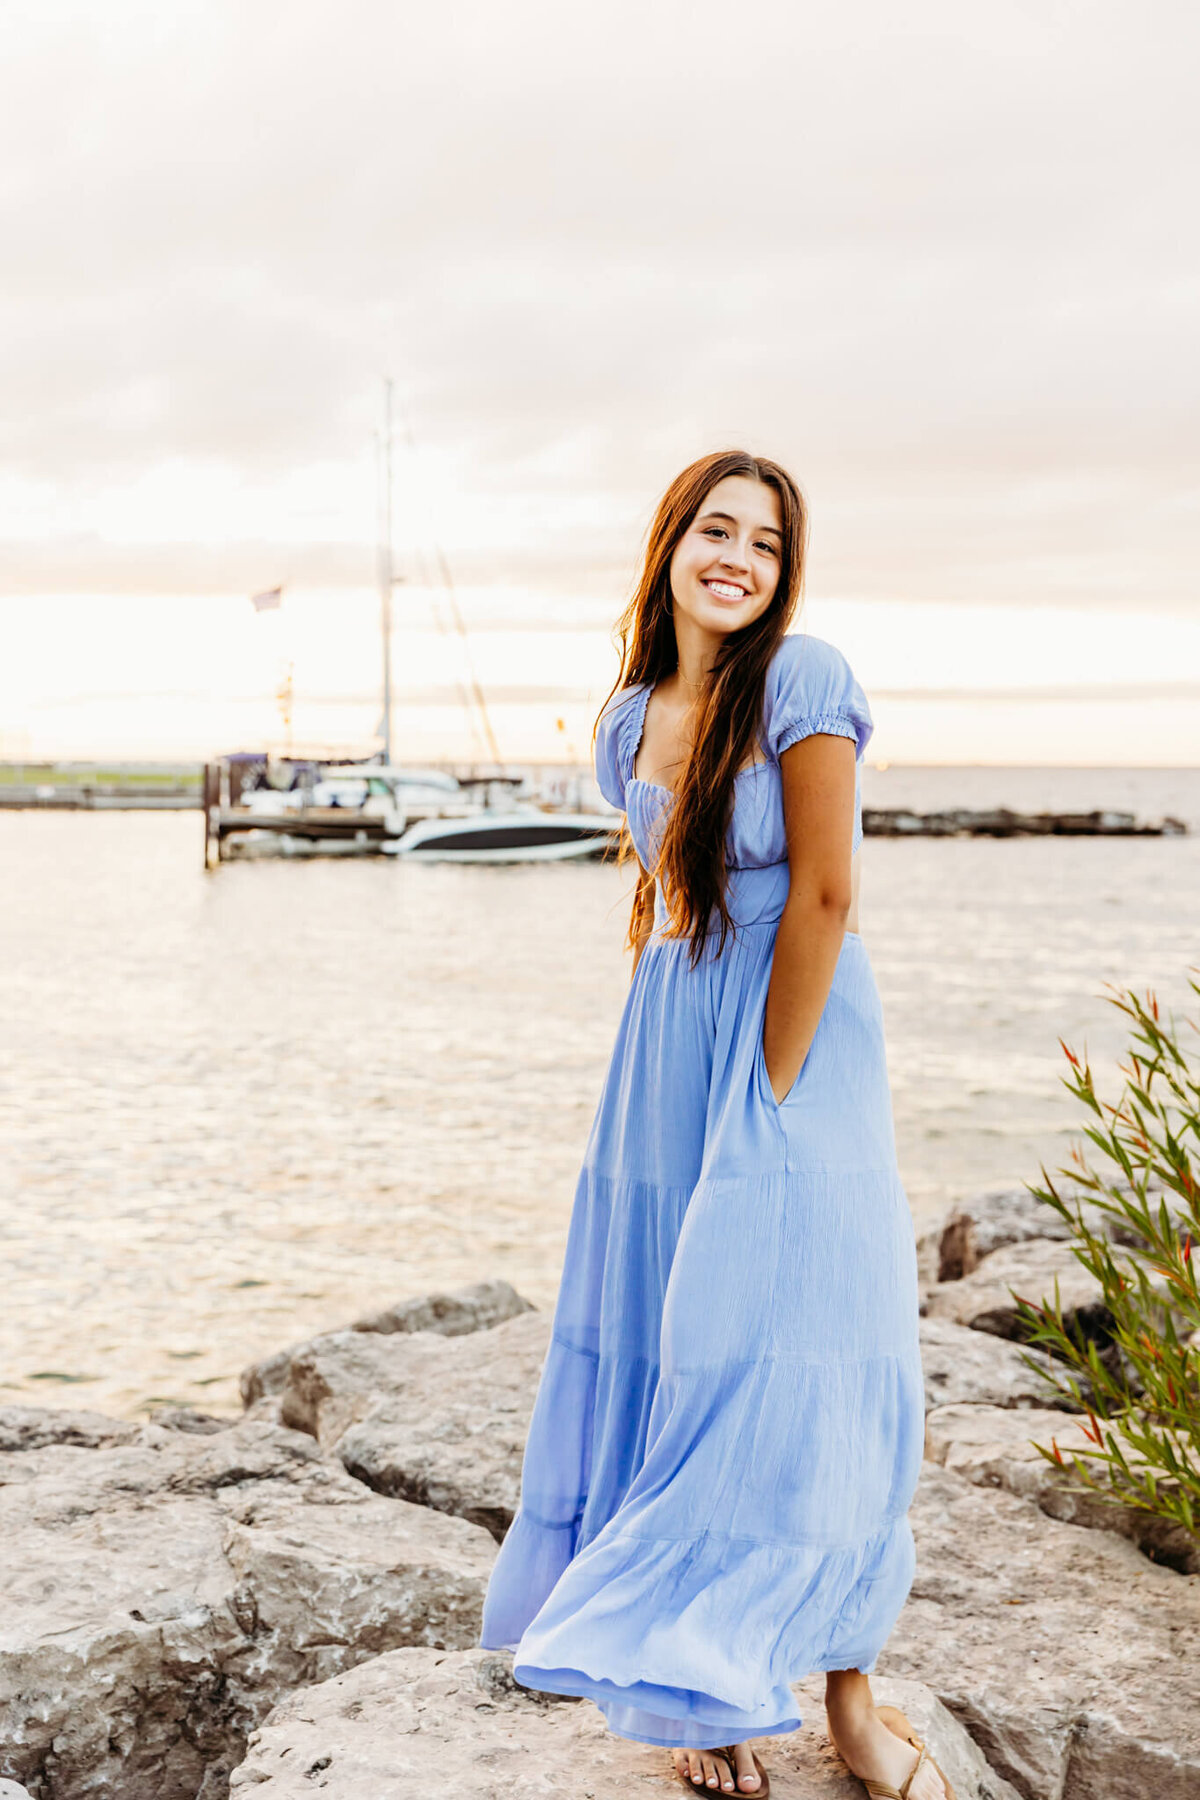 teenager twirling in her blue dress on top of large rocks with the lake and sailboats in the background